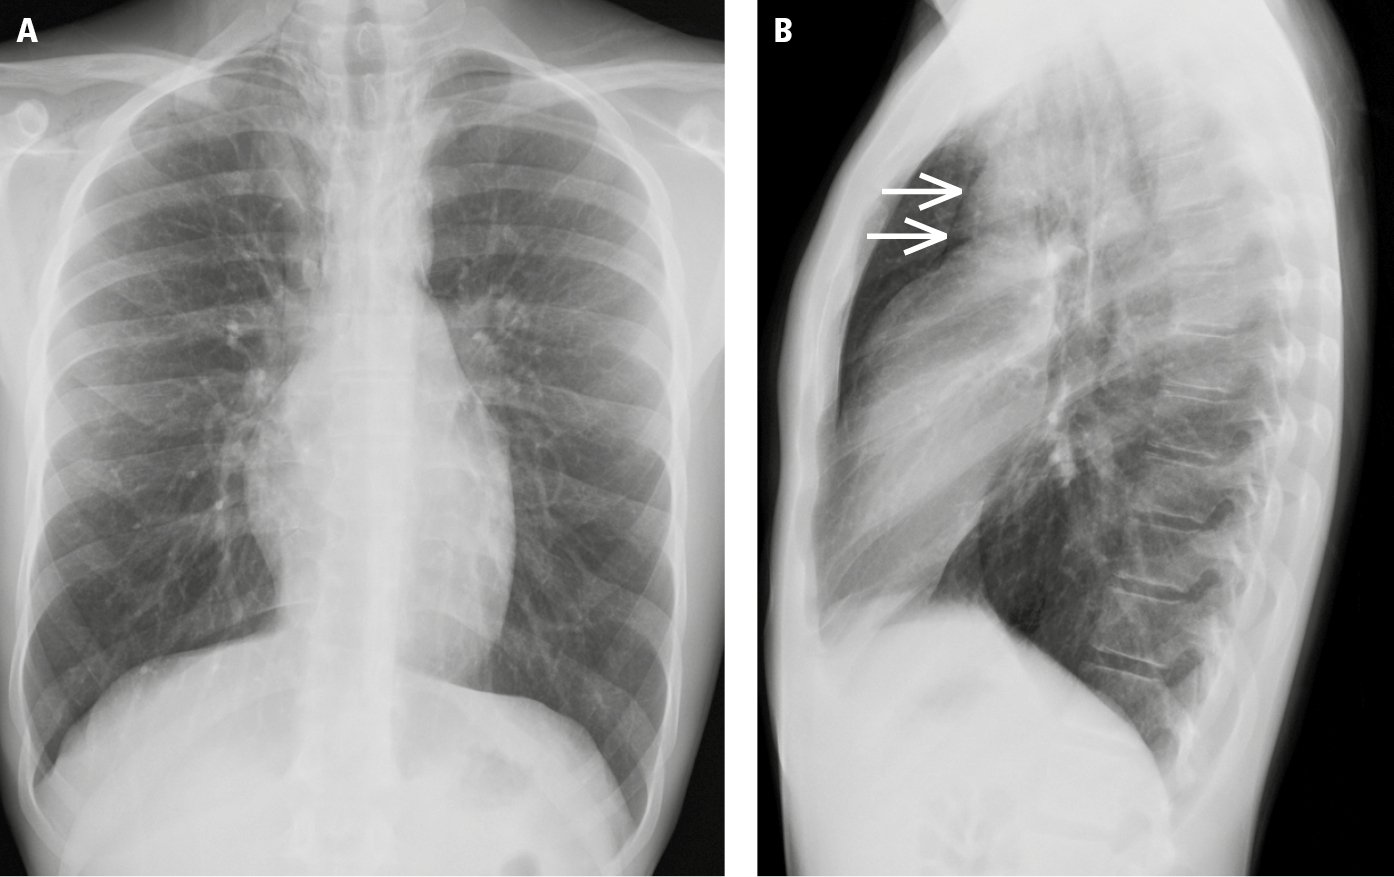 Figure 031_6138.  A patient with subtle pneumomediastinum, hardly seen on posteroanterior (PA) chest radiographs ( A ), that is identified on the basis of a thin radiolucent line highlighting the contour of the aorta (arrows) on the left lateral view ( B ). This finding represents air in the mediastinal soft tissue. 